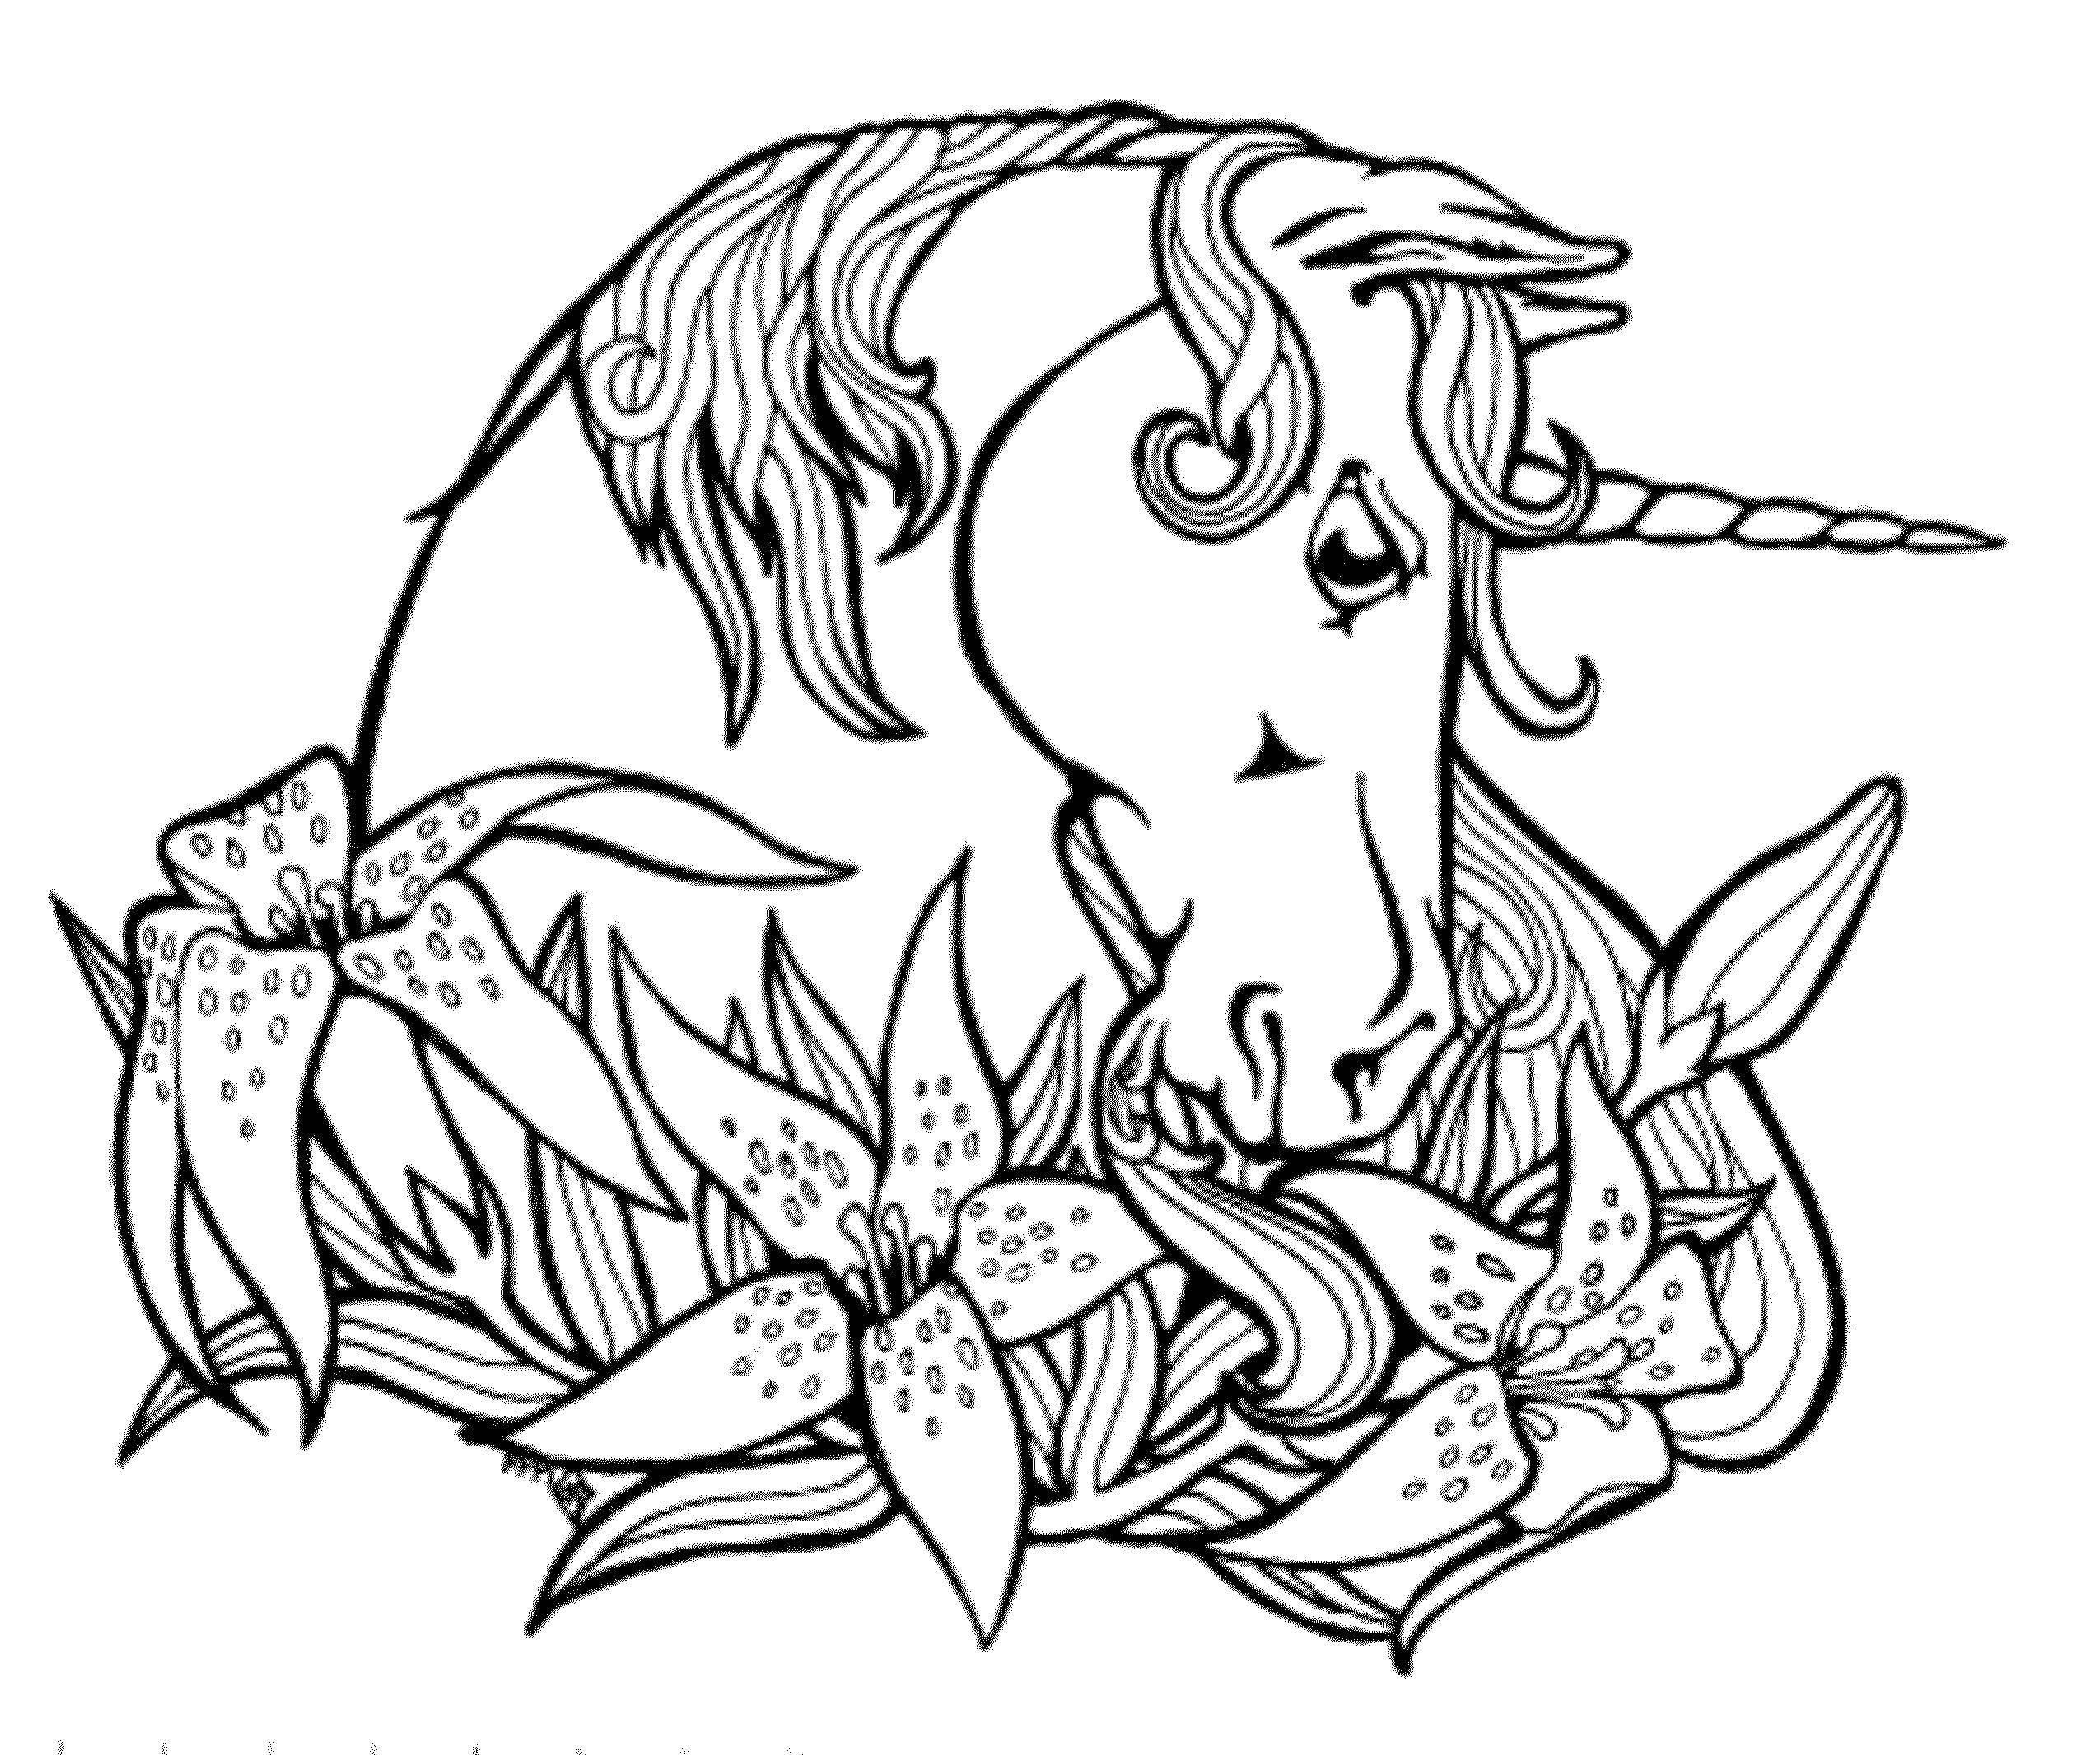 Coloring Unicorn in flowers. Category Ponies. Tags:  pony tale, girls, unicorn.